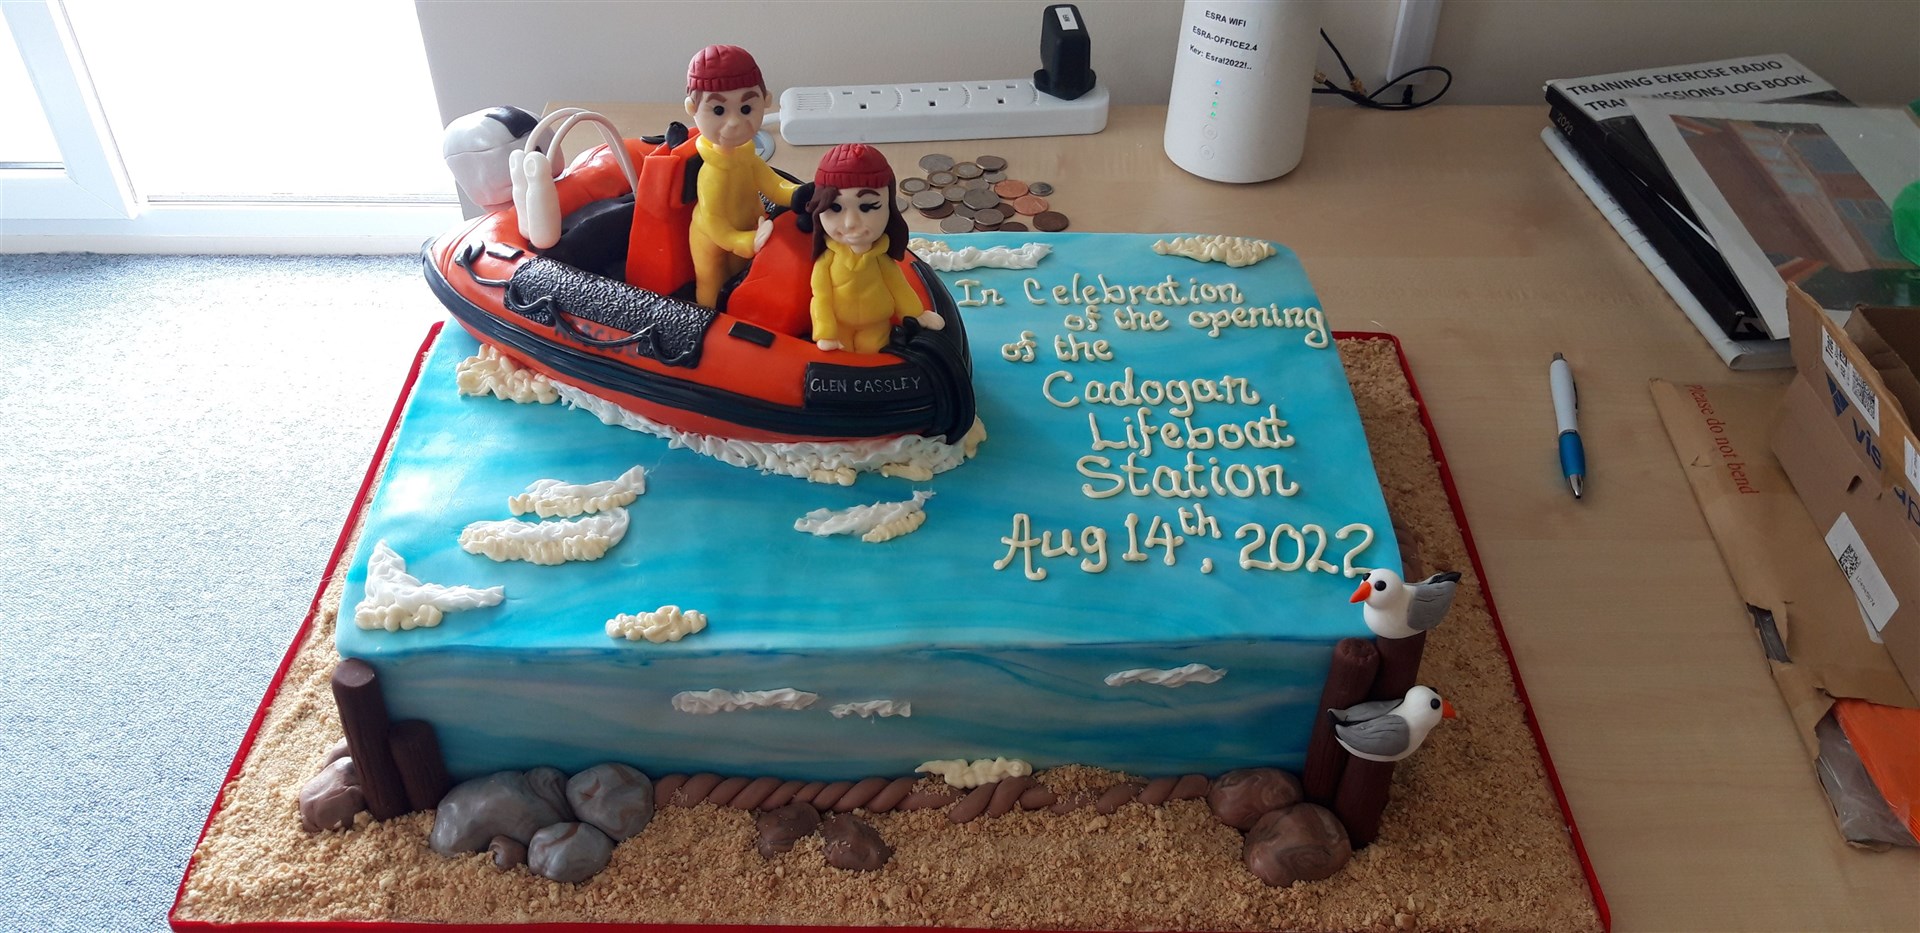 A stunning cake topped with an edible boat and crew members was made to mark the opening of The Cadogan Lifeboat Station.